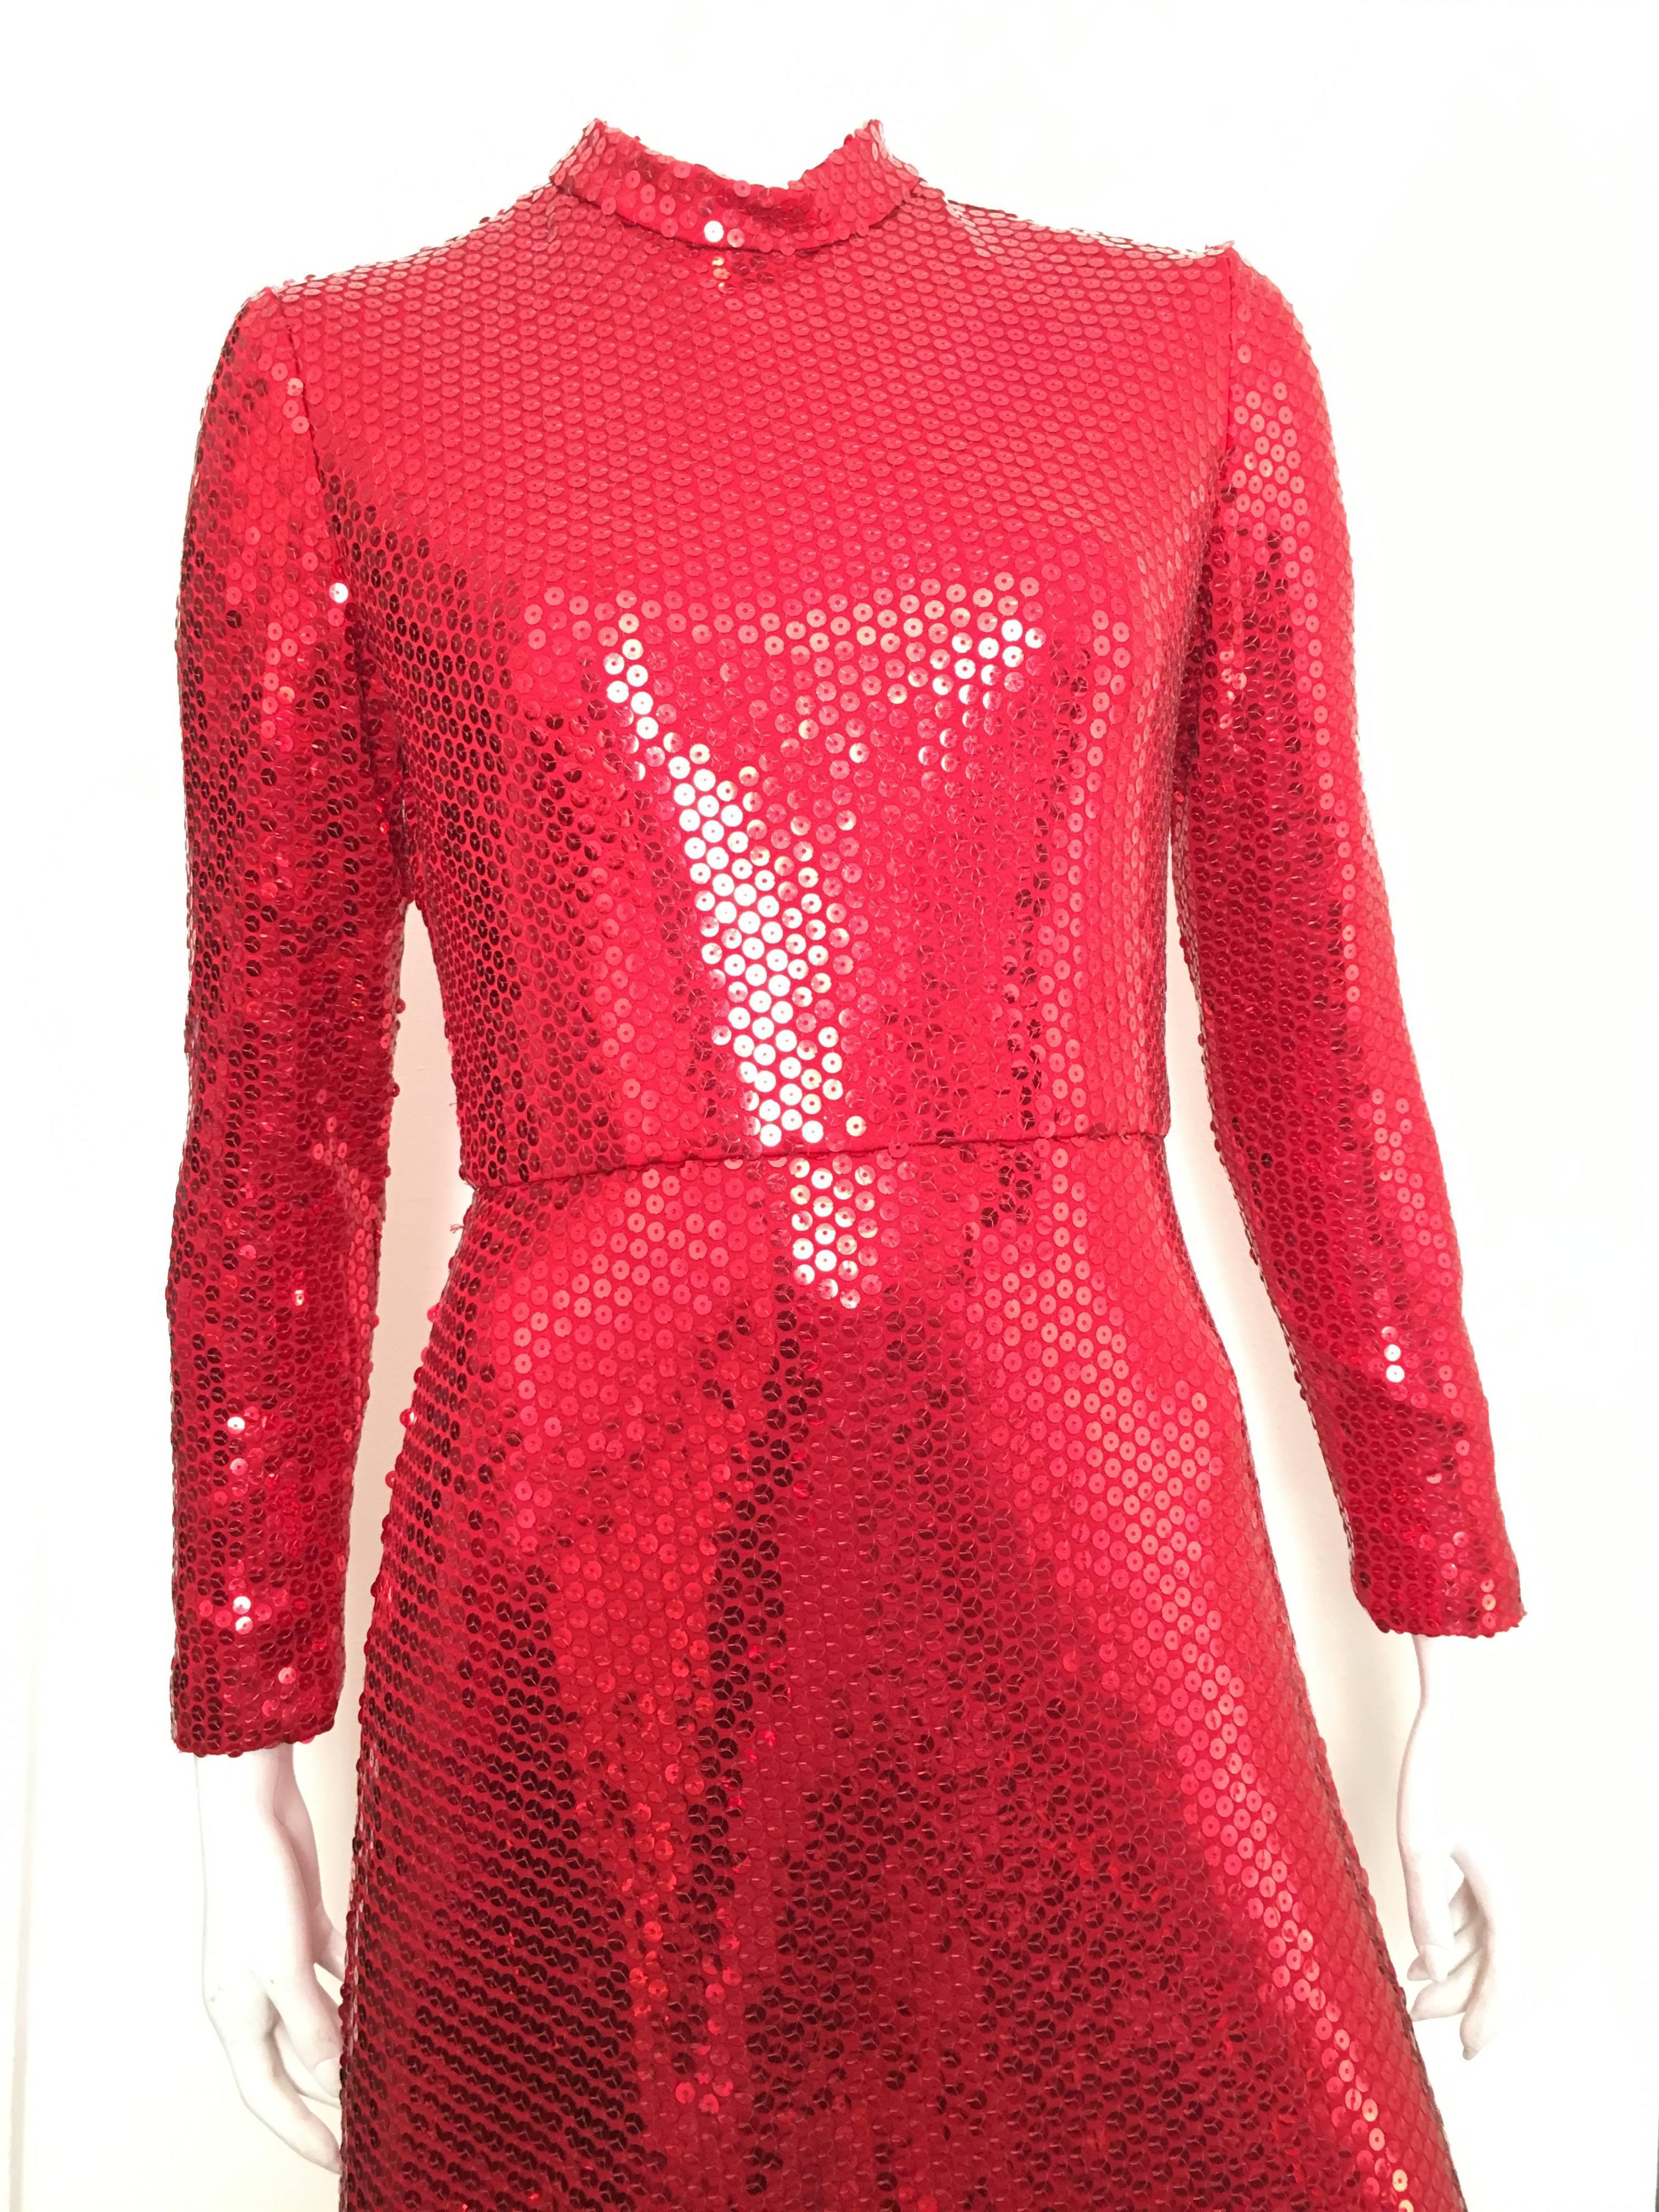 Neiman Marcus Silver Key 1980s red sequin gown is size 6.  Ladies please use your measuring tape so you can measure your bust, waist & hips to make certain this vintage treasure will fit your lovely body.  Gown is lined. 
This red sequin gown is